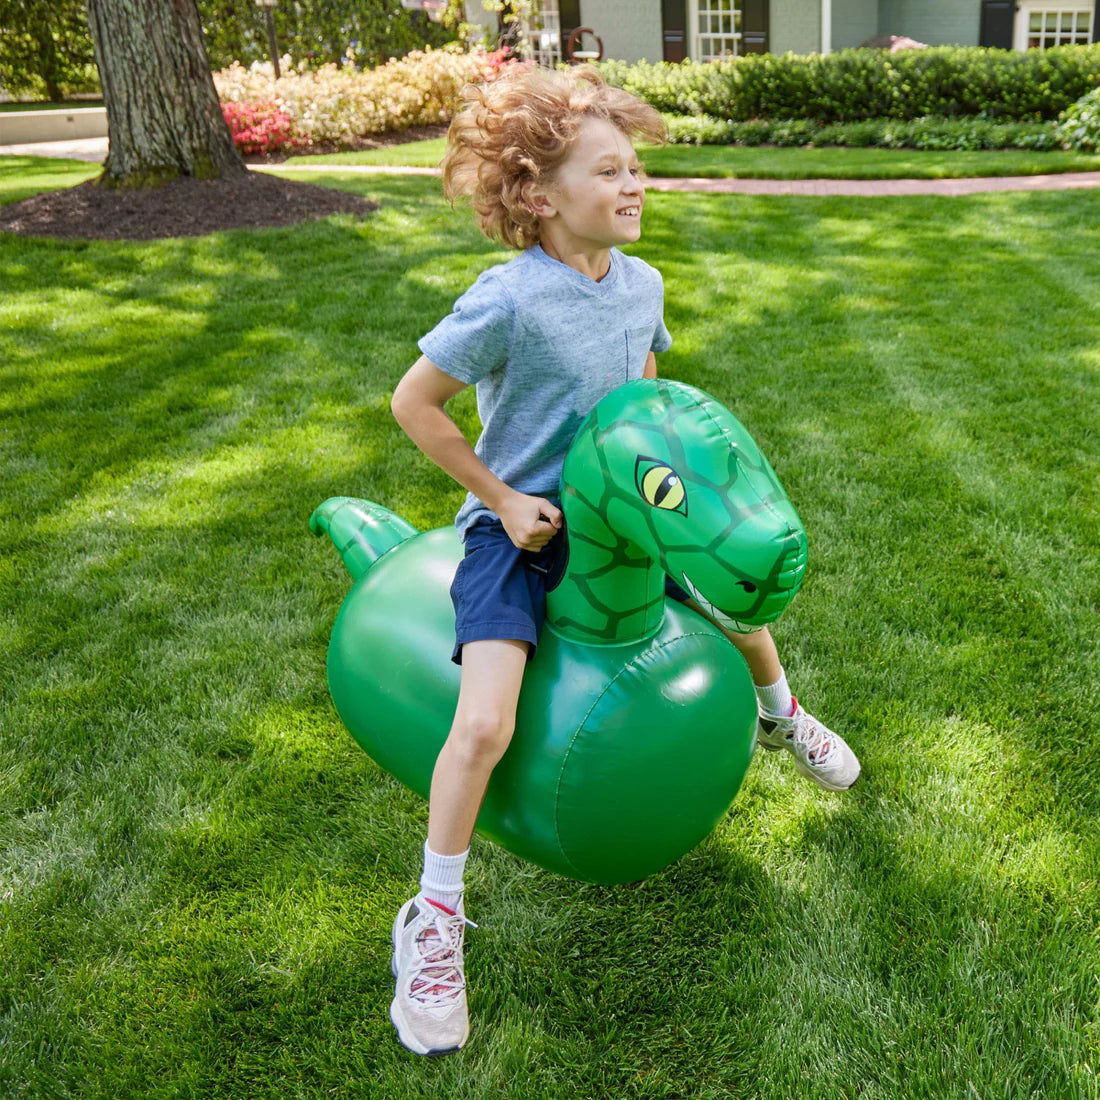 Inflatable Ride-On Hop 'n Go Dino